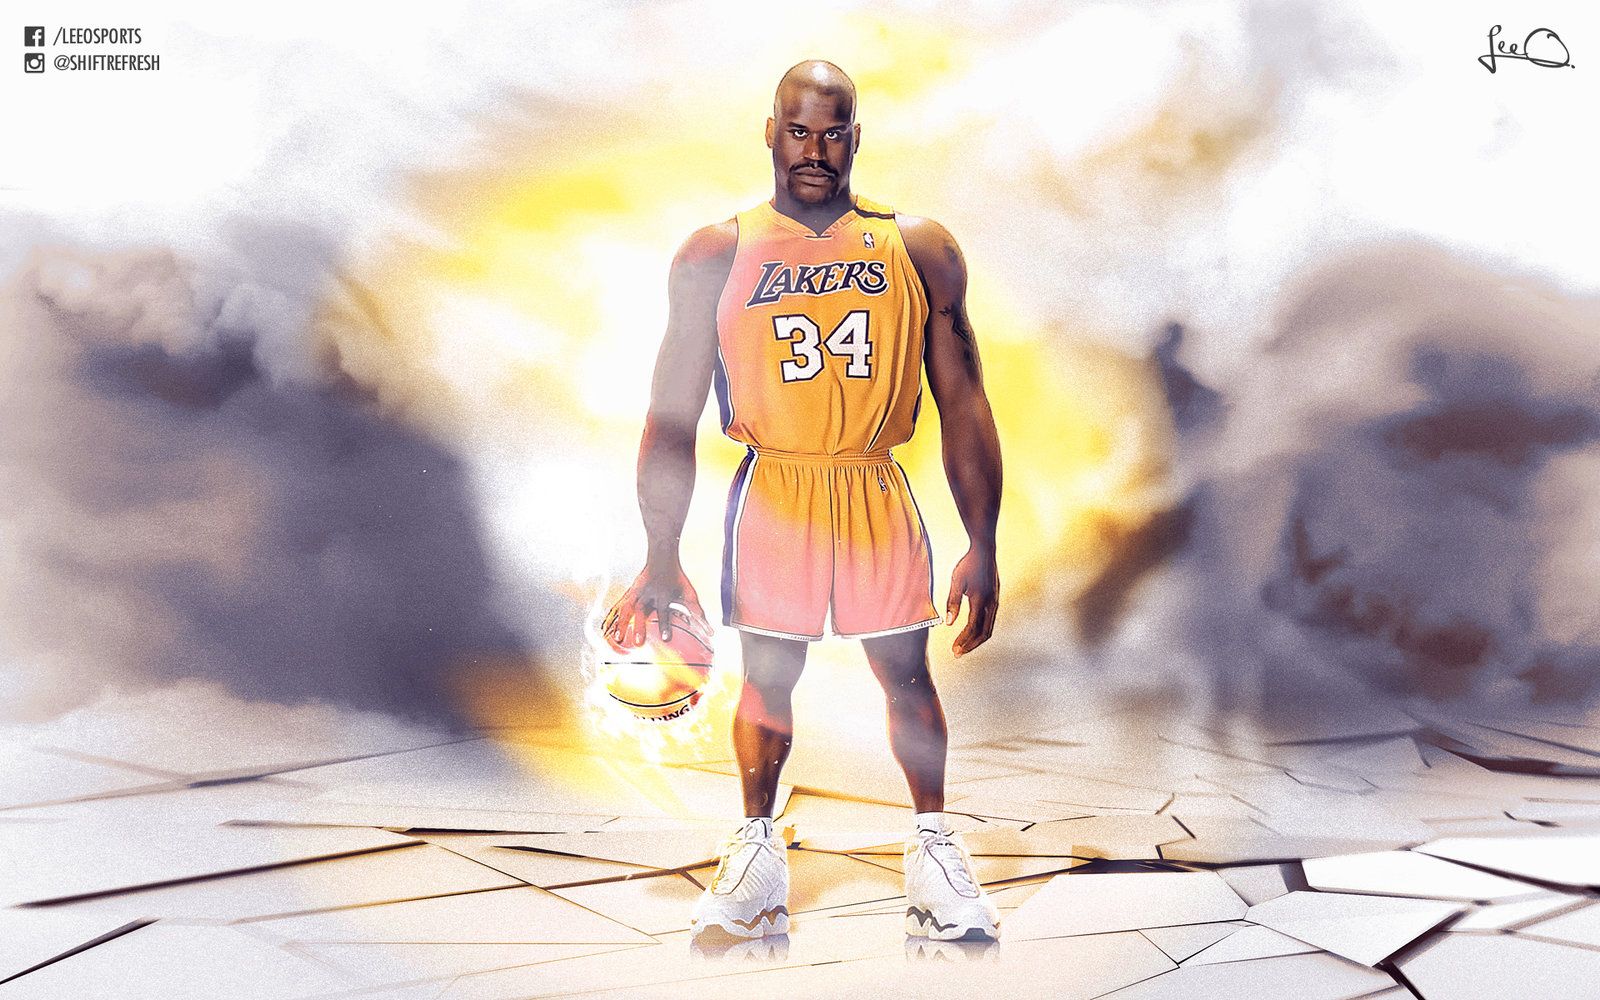 Shaquille O'Neal Wallpaper. Shaquille O